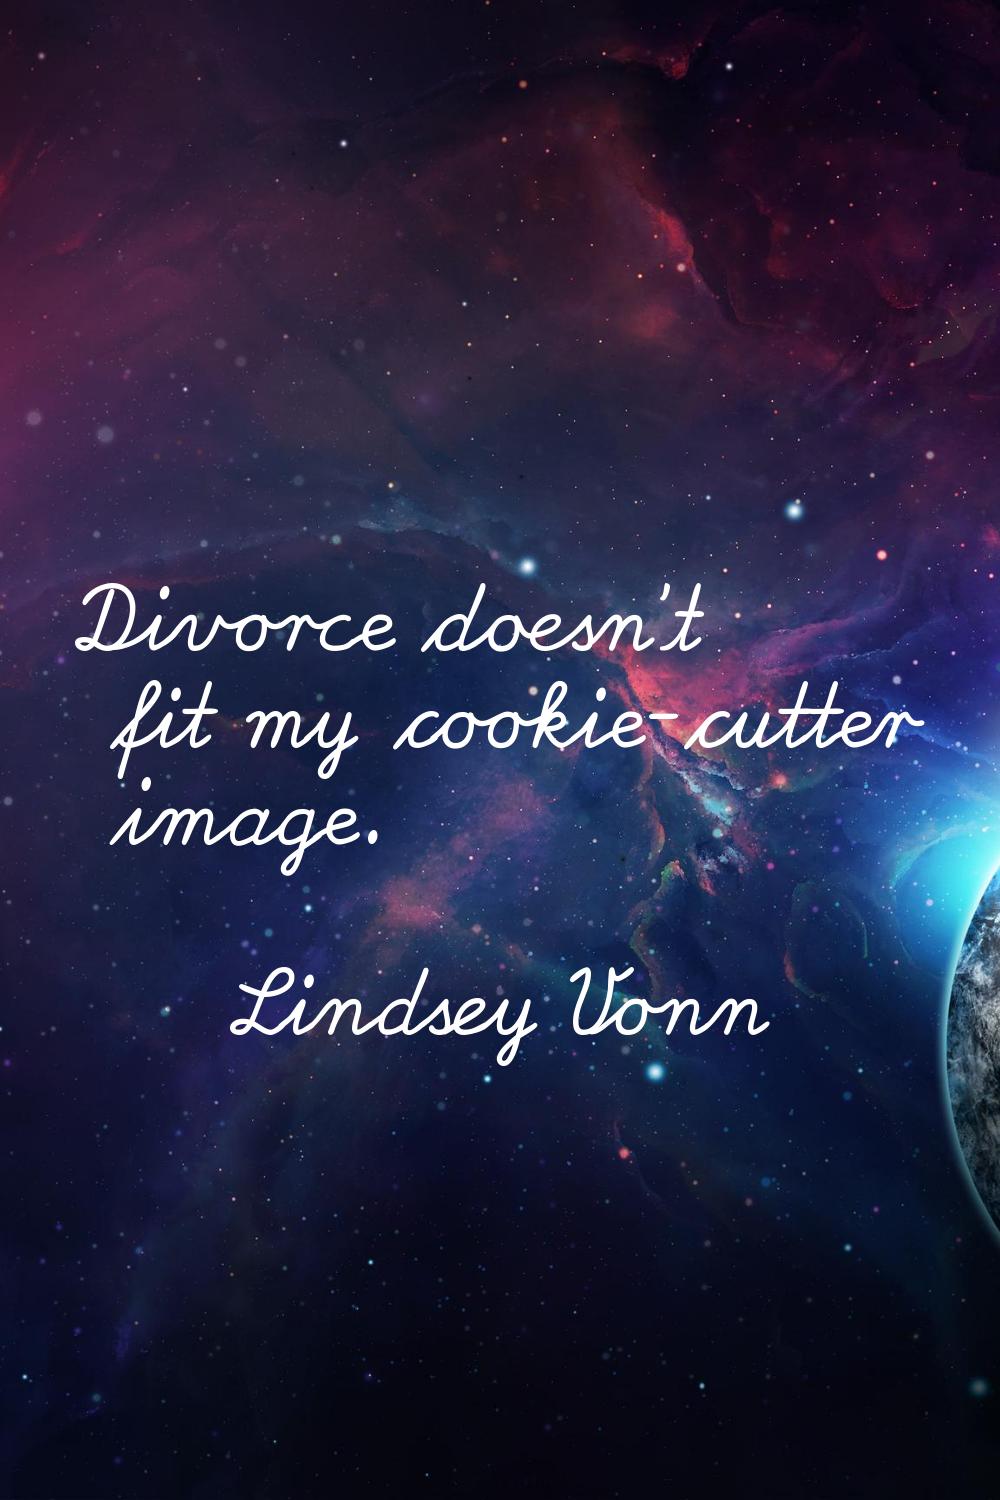 Divorce doesn't fit my cookie-cutter image.